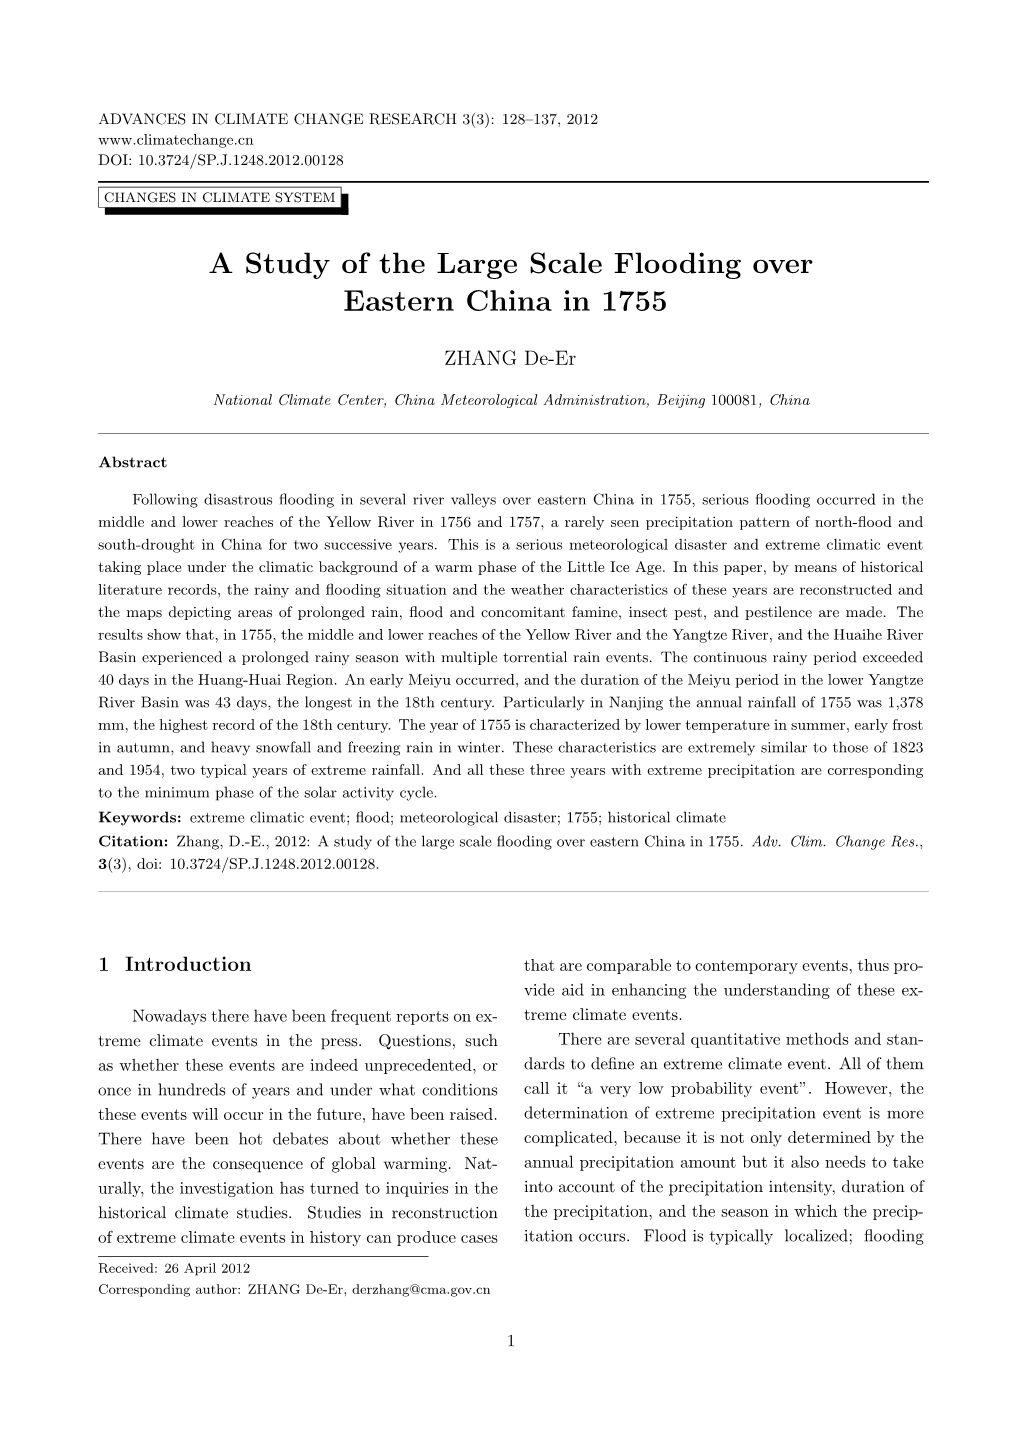 A Study of the Large Scale Flooding Over Eastern China in 1755